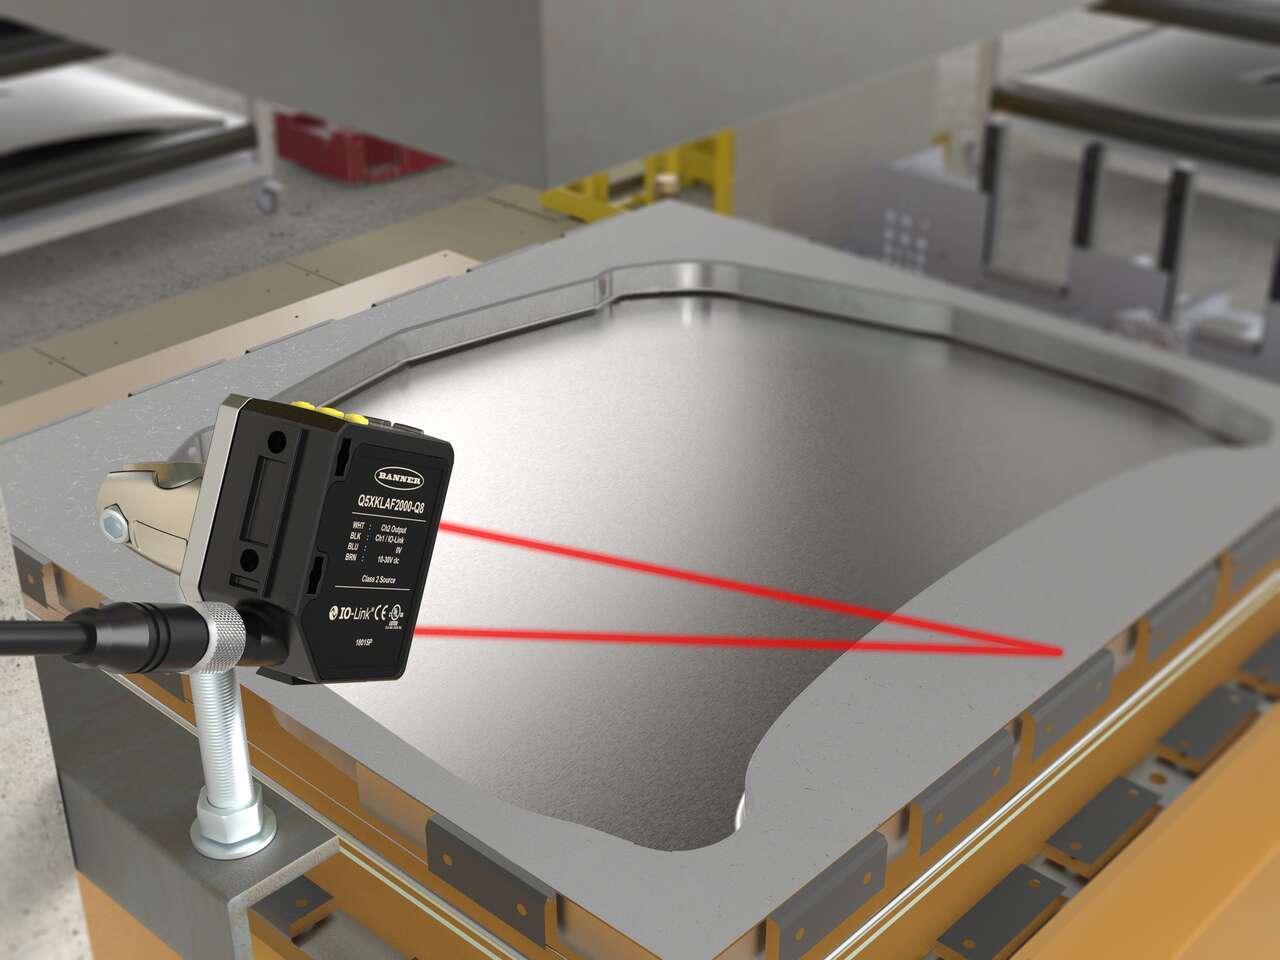 laser sensor verifies that a metal sheet is indexed on a stamping press